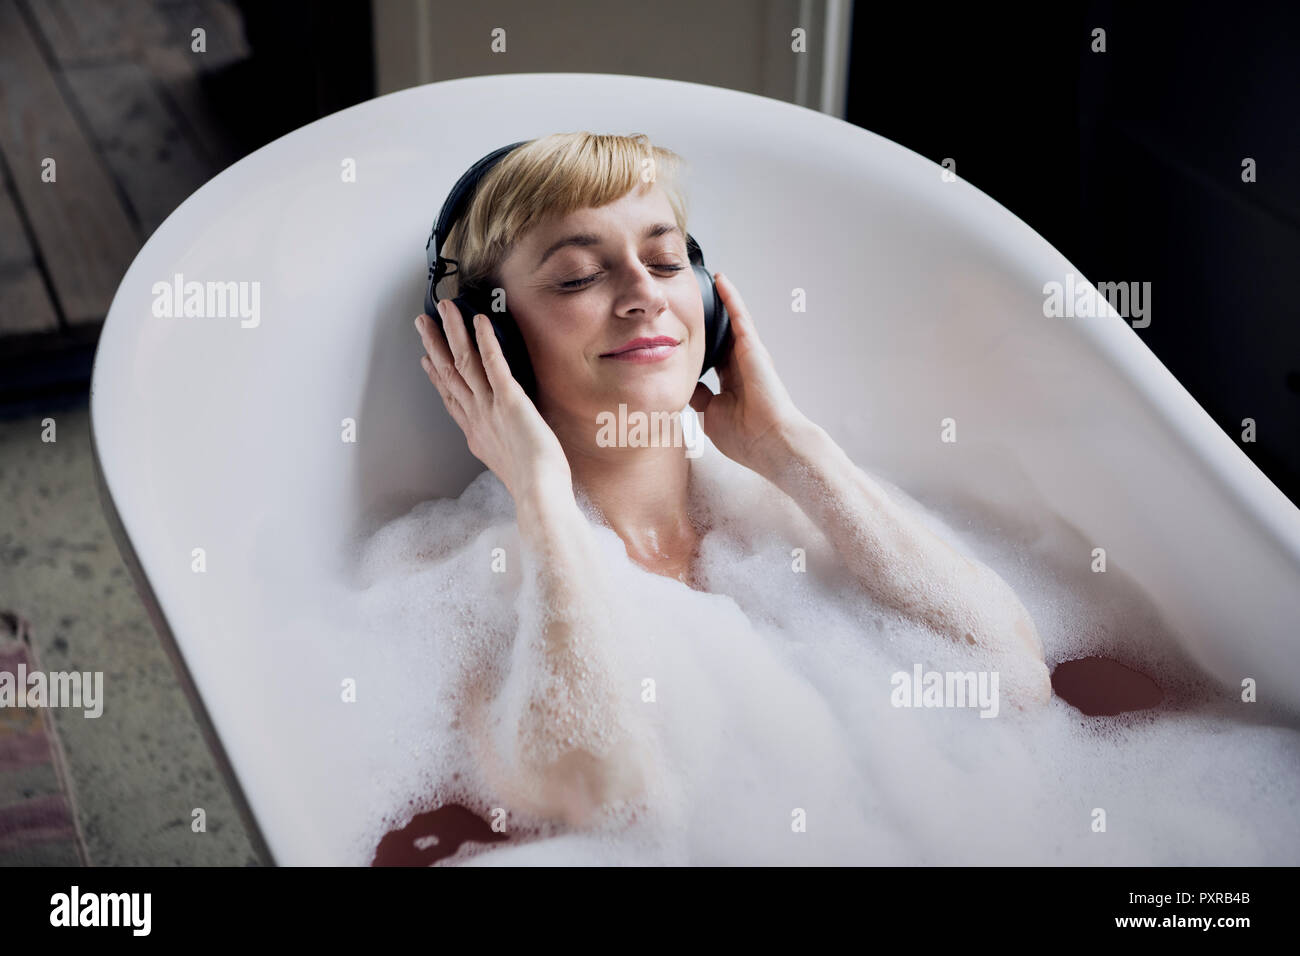 Blond woman taking bubble bath in a loft listenung music with headphones Stock Photo